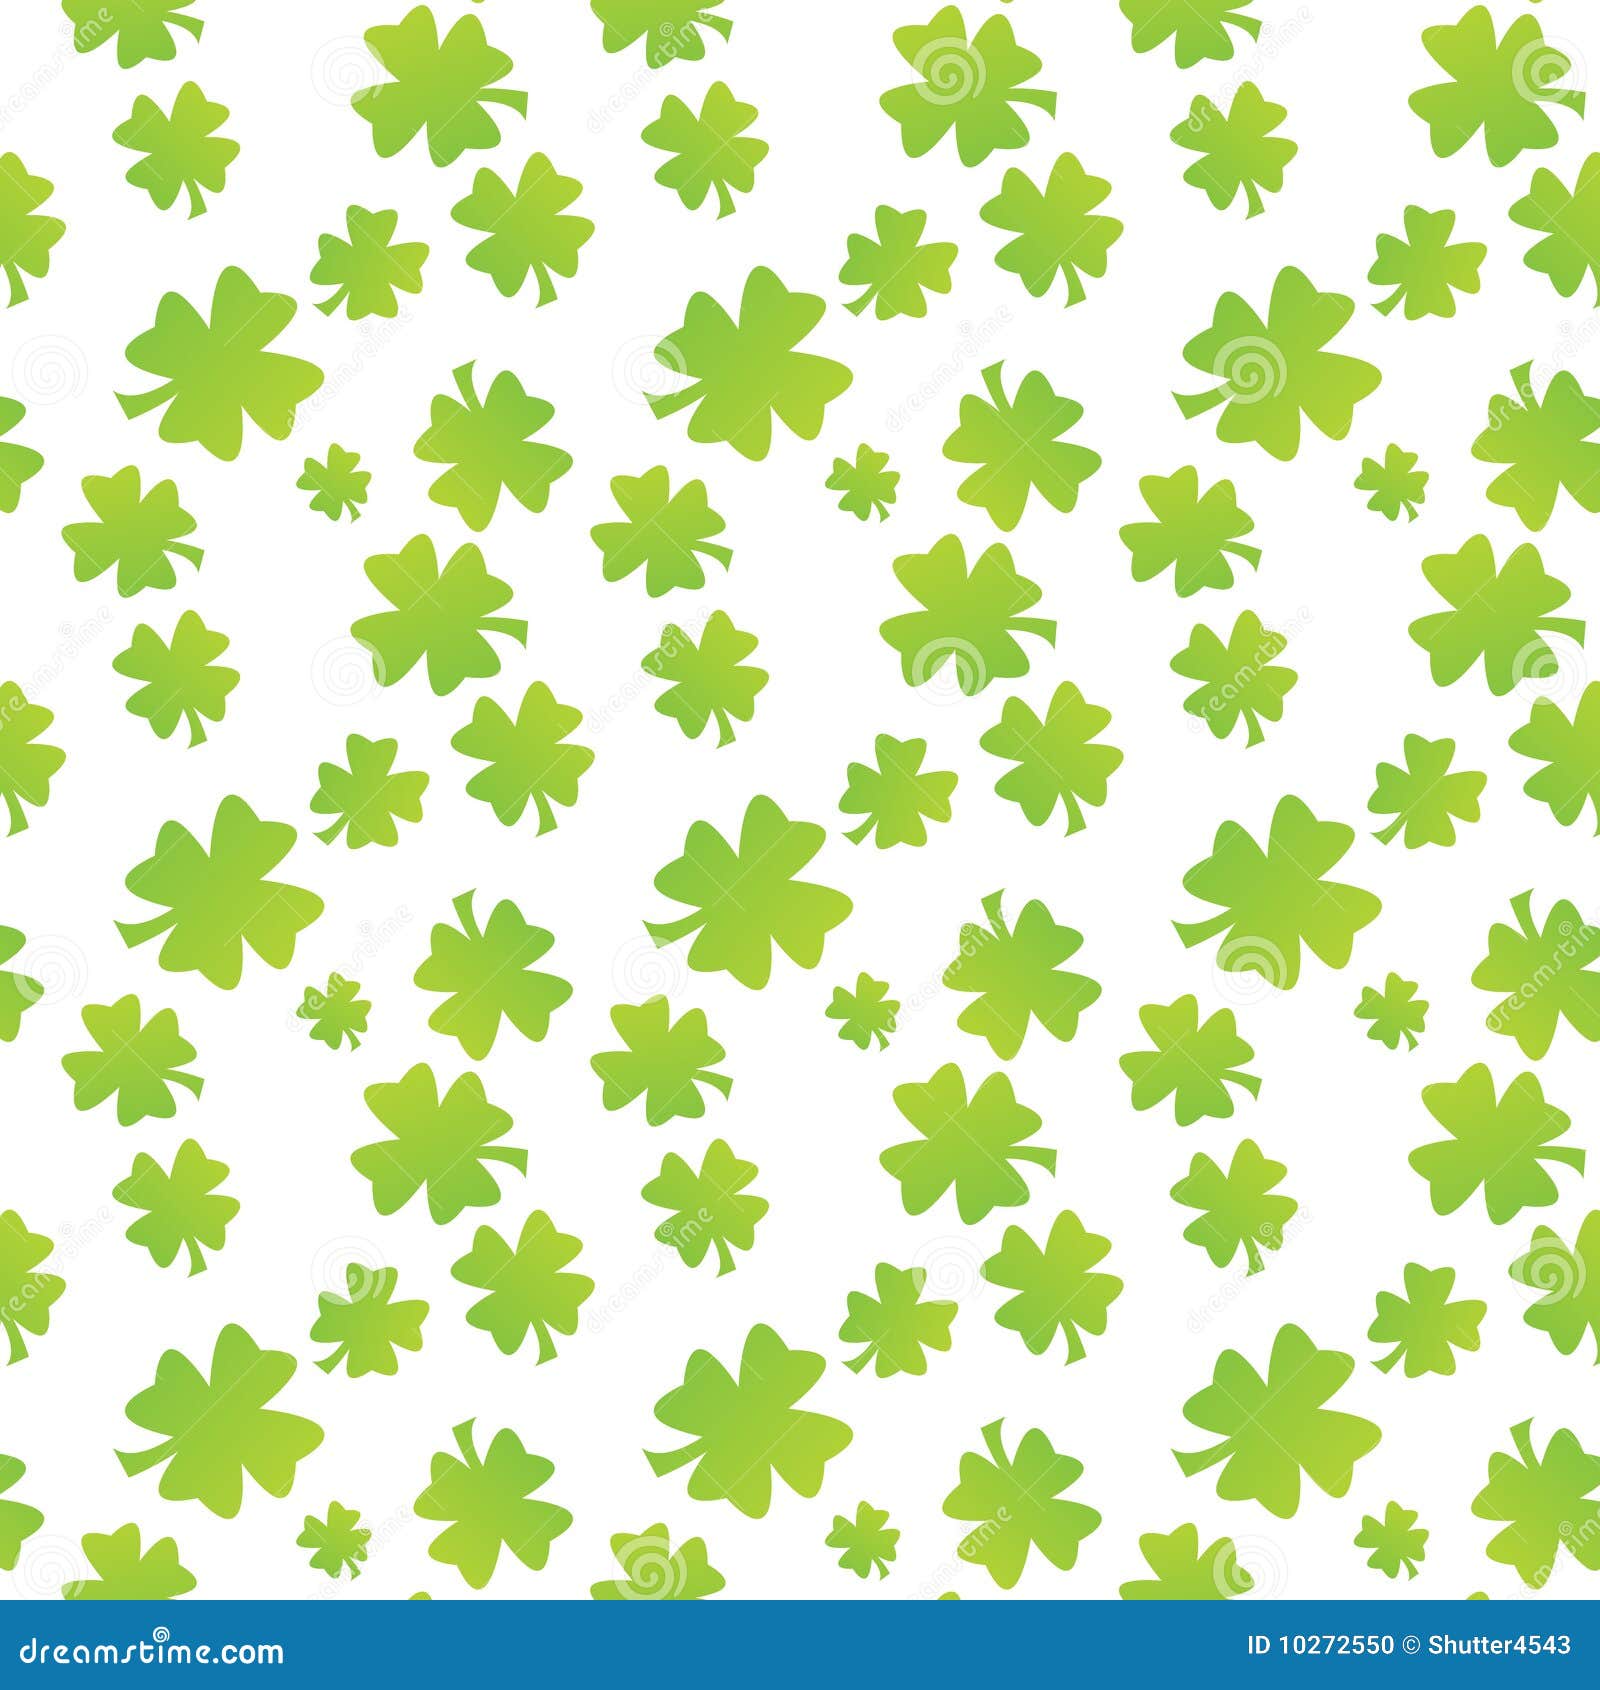 Seamless Clover Leaf Pattern Stock Photo  Image: 10272550